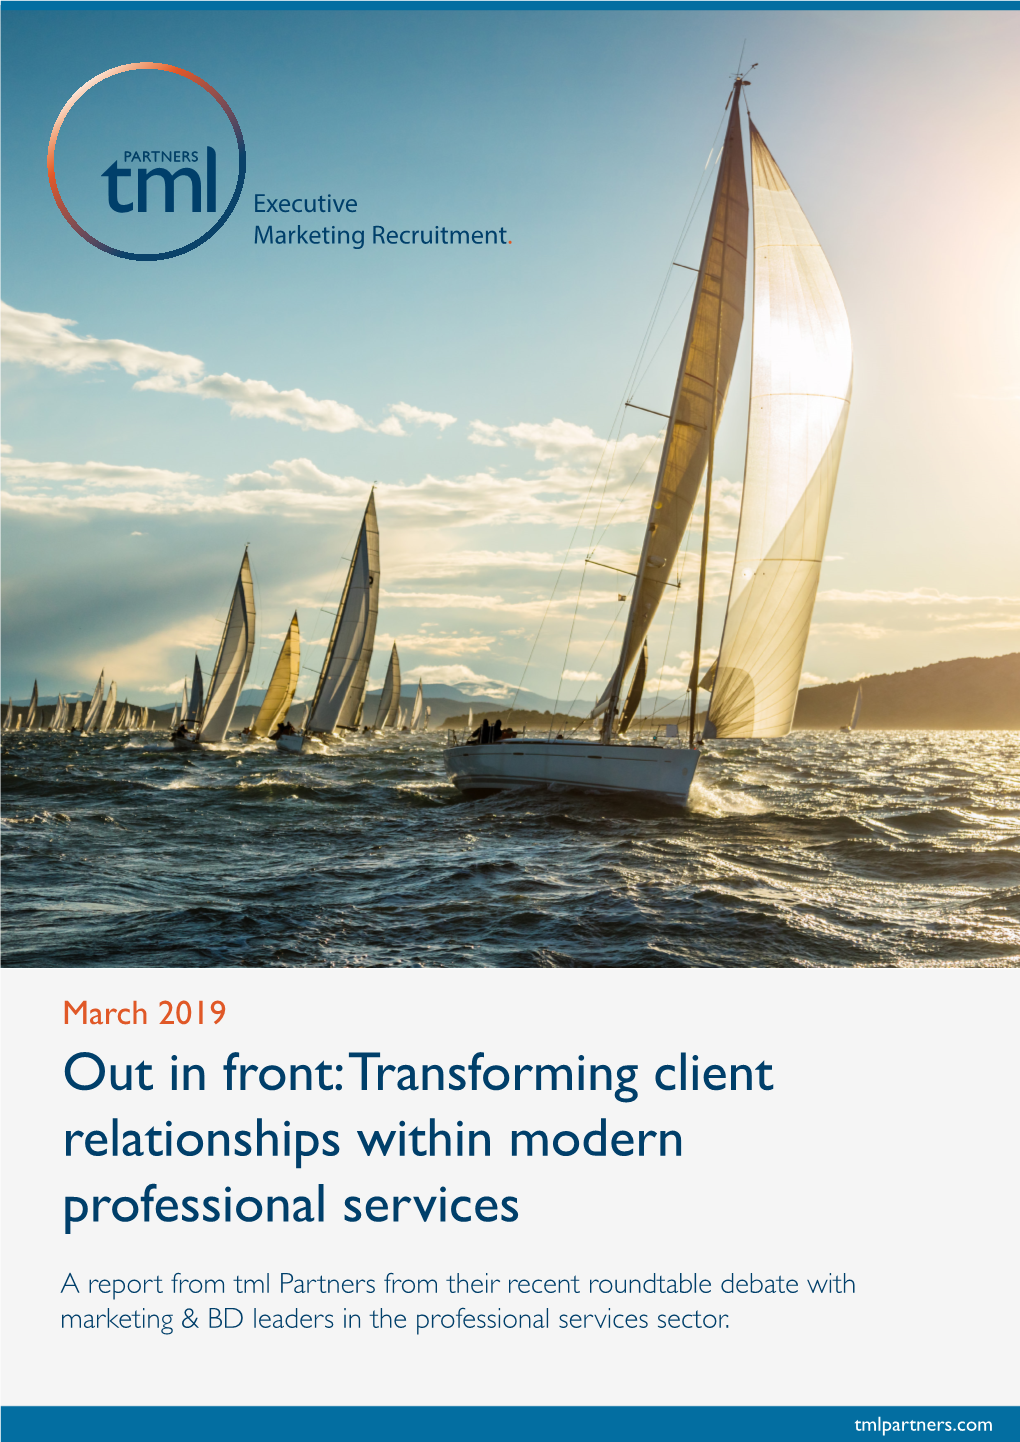 Out in Front: Transforming Client Relationships Within Modern Professional Services